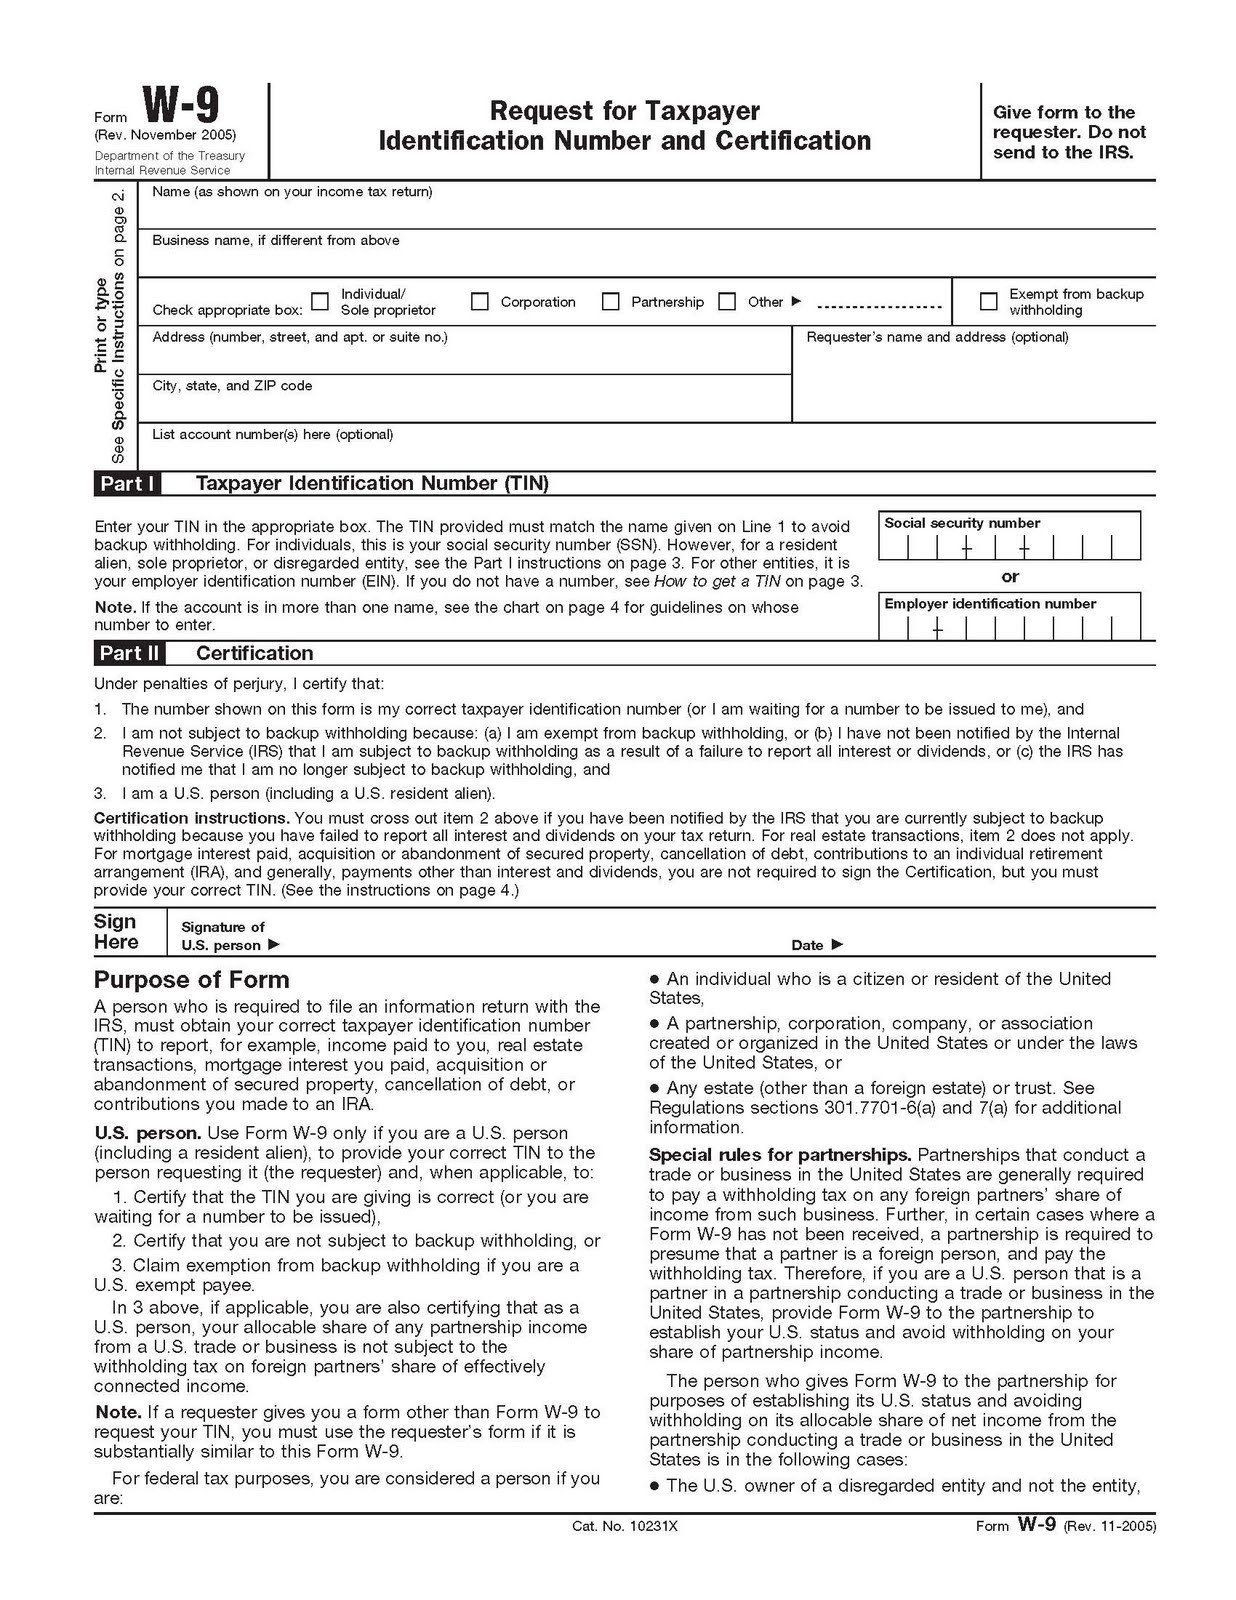 Downloadable Form W 9 Download W9 Form | Tax Forms, Irs-2021 W-9 Form Printable Free